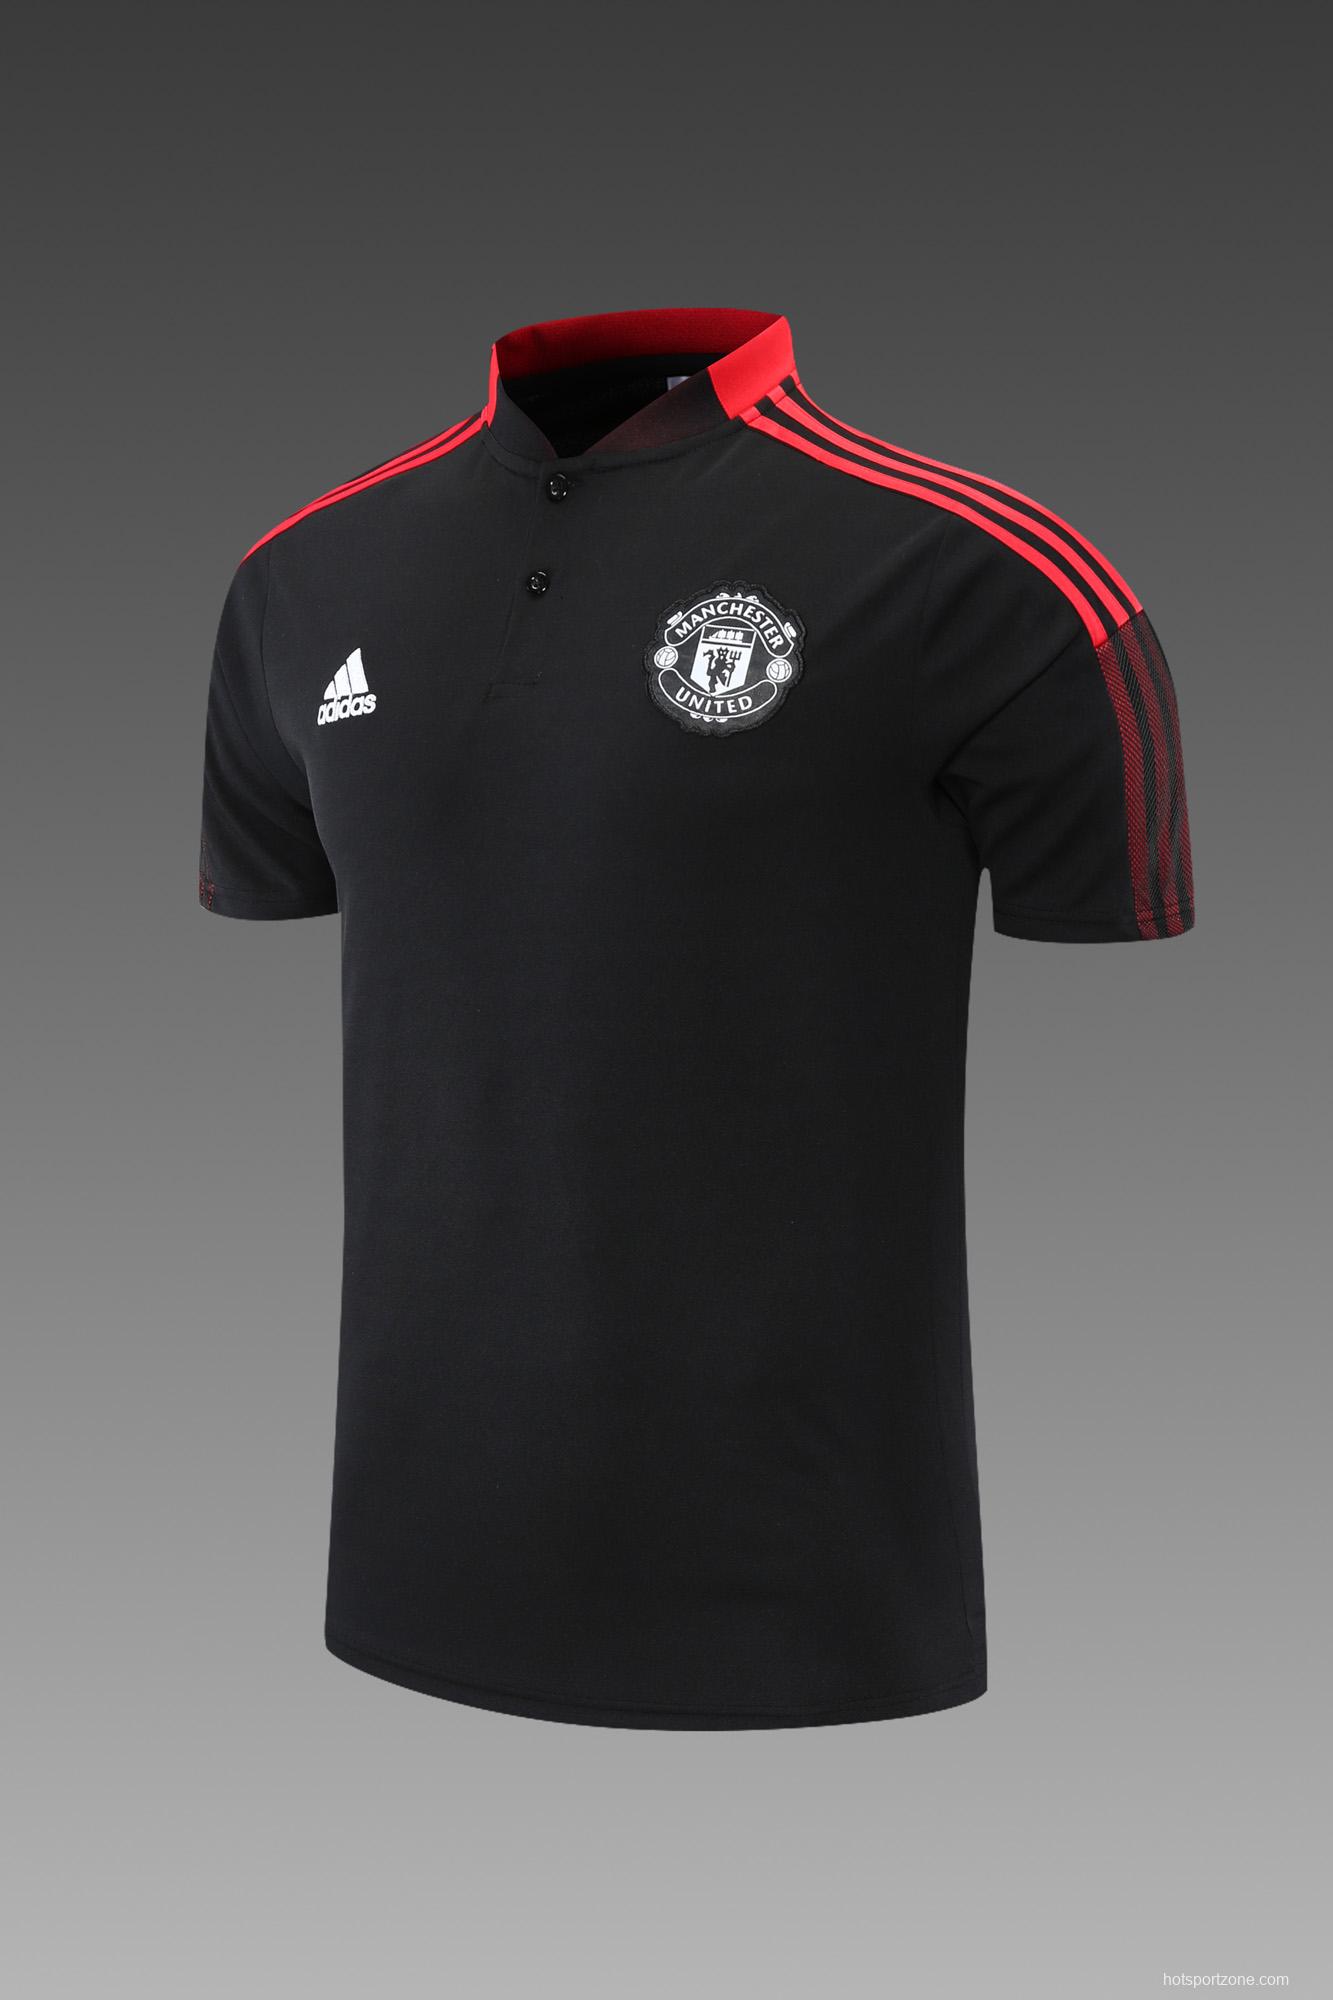 Manchester United POLO kit Black and red stripes(not supported to be sold separately)